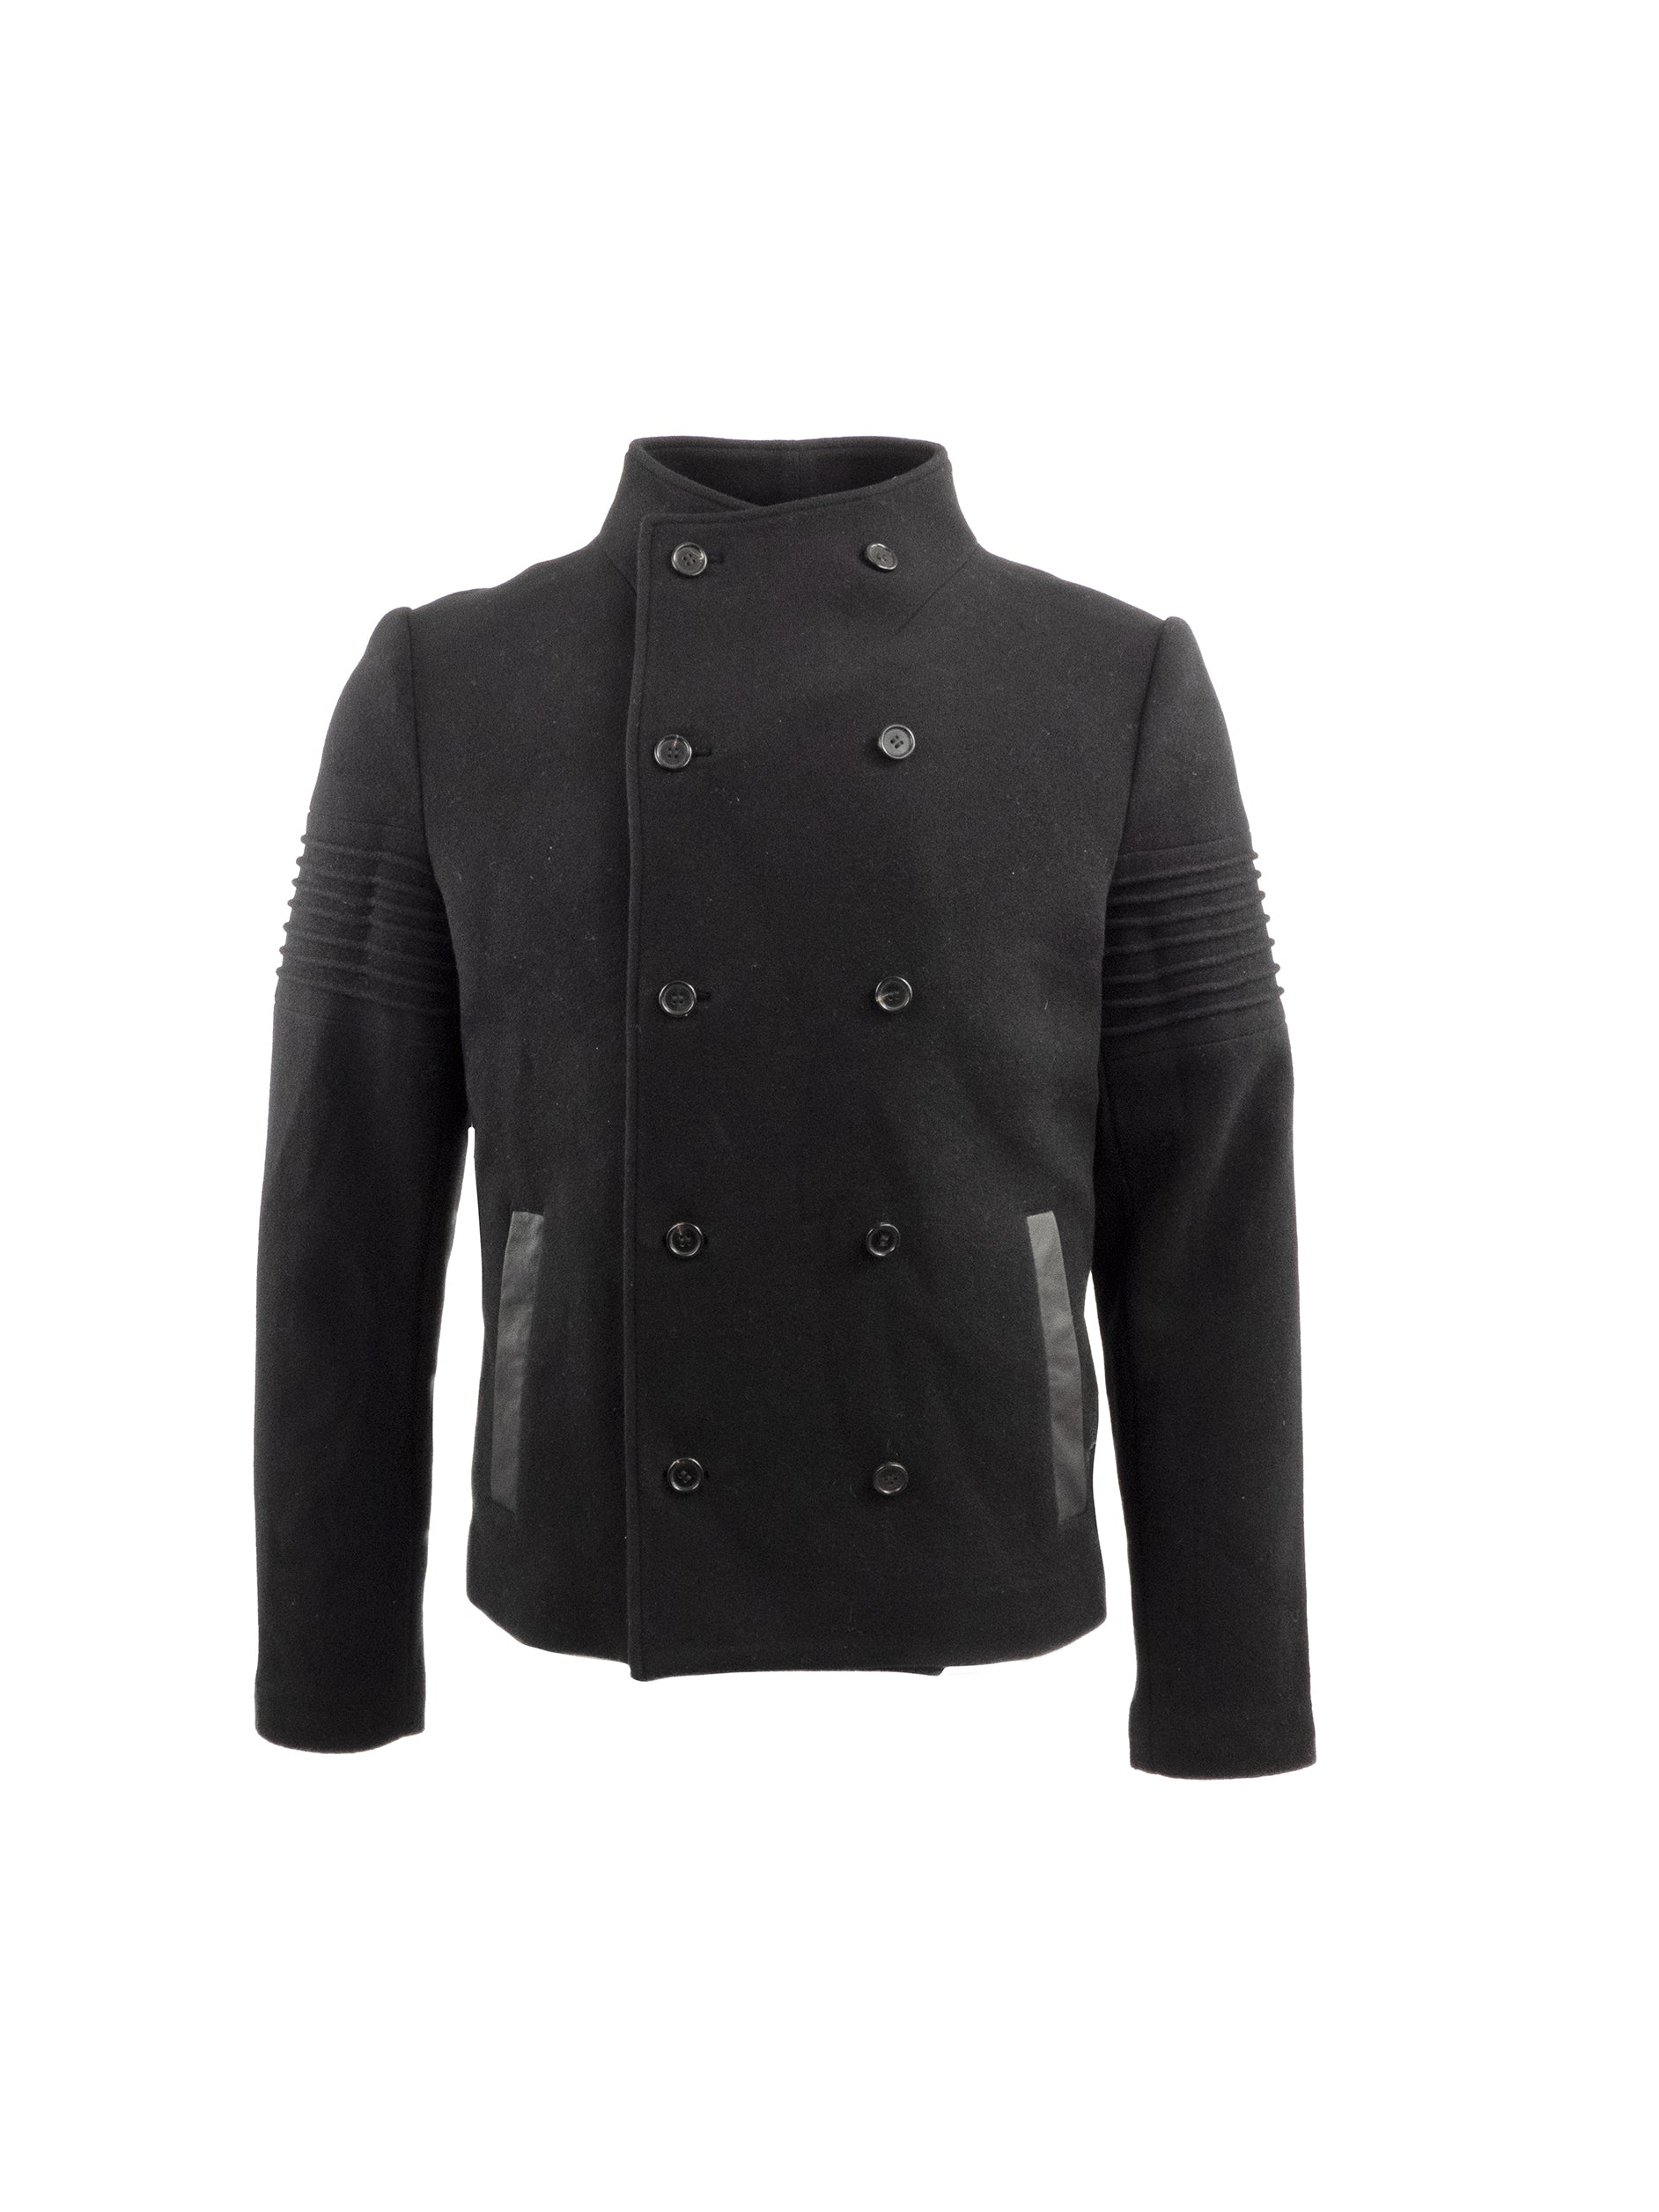 BLACK WOOL BUTTON UP JACKET WITH LEATHER DETAILING